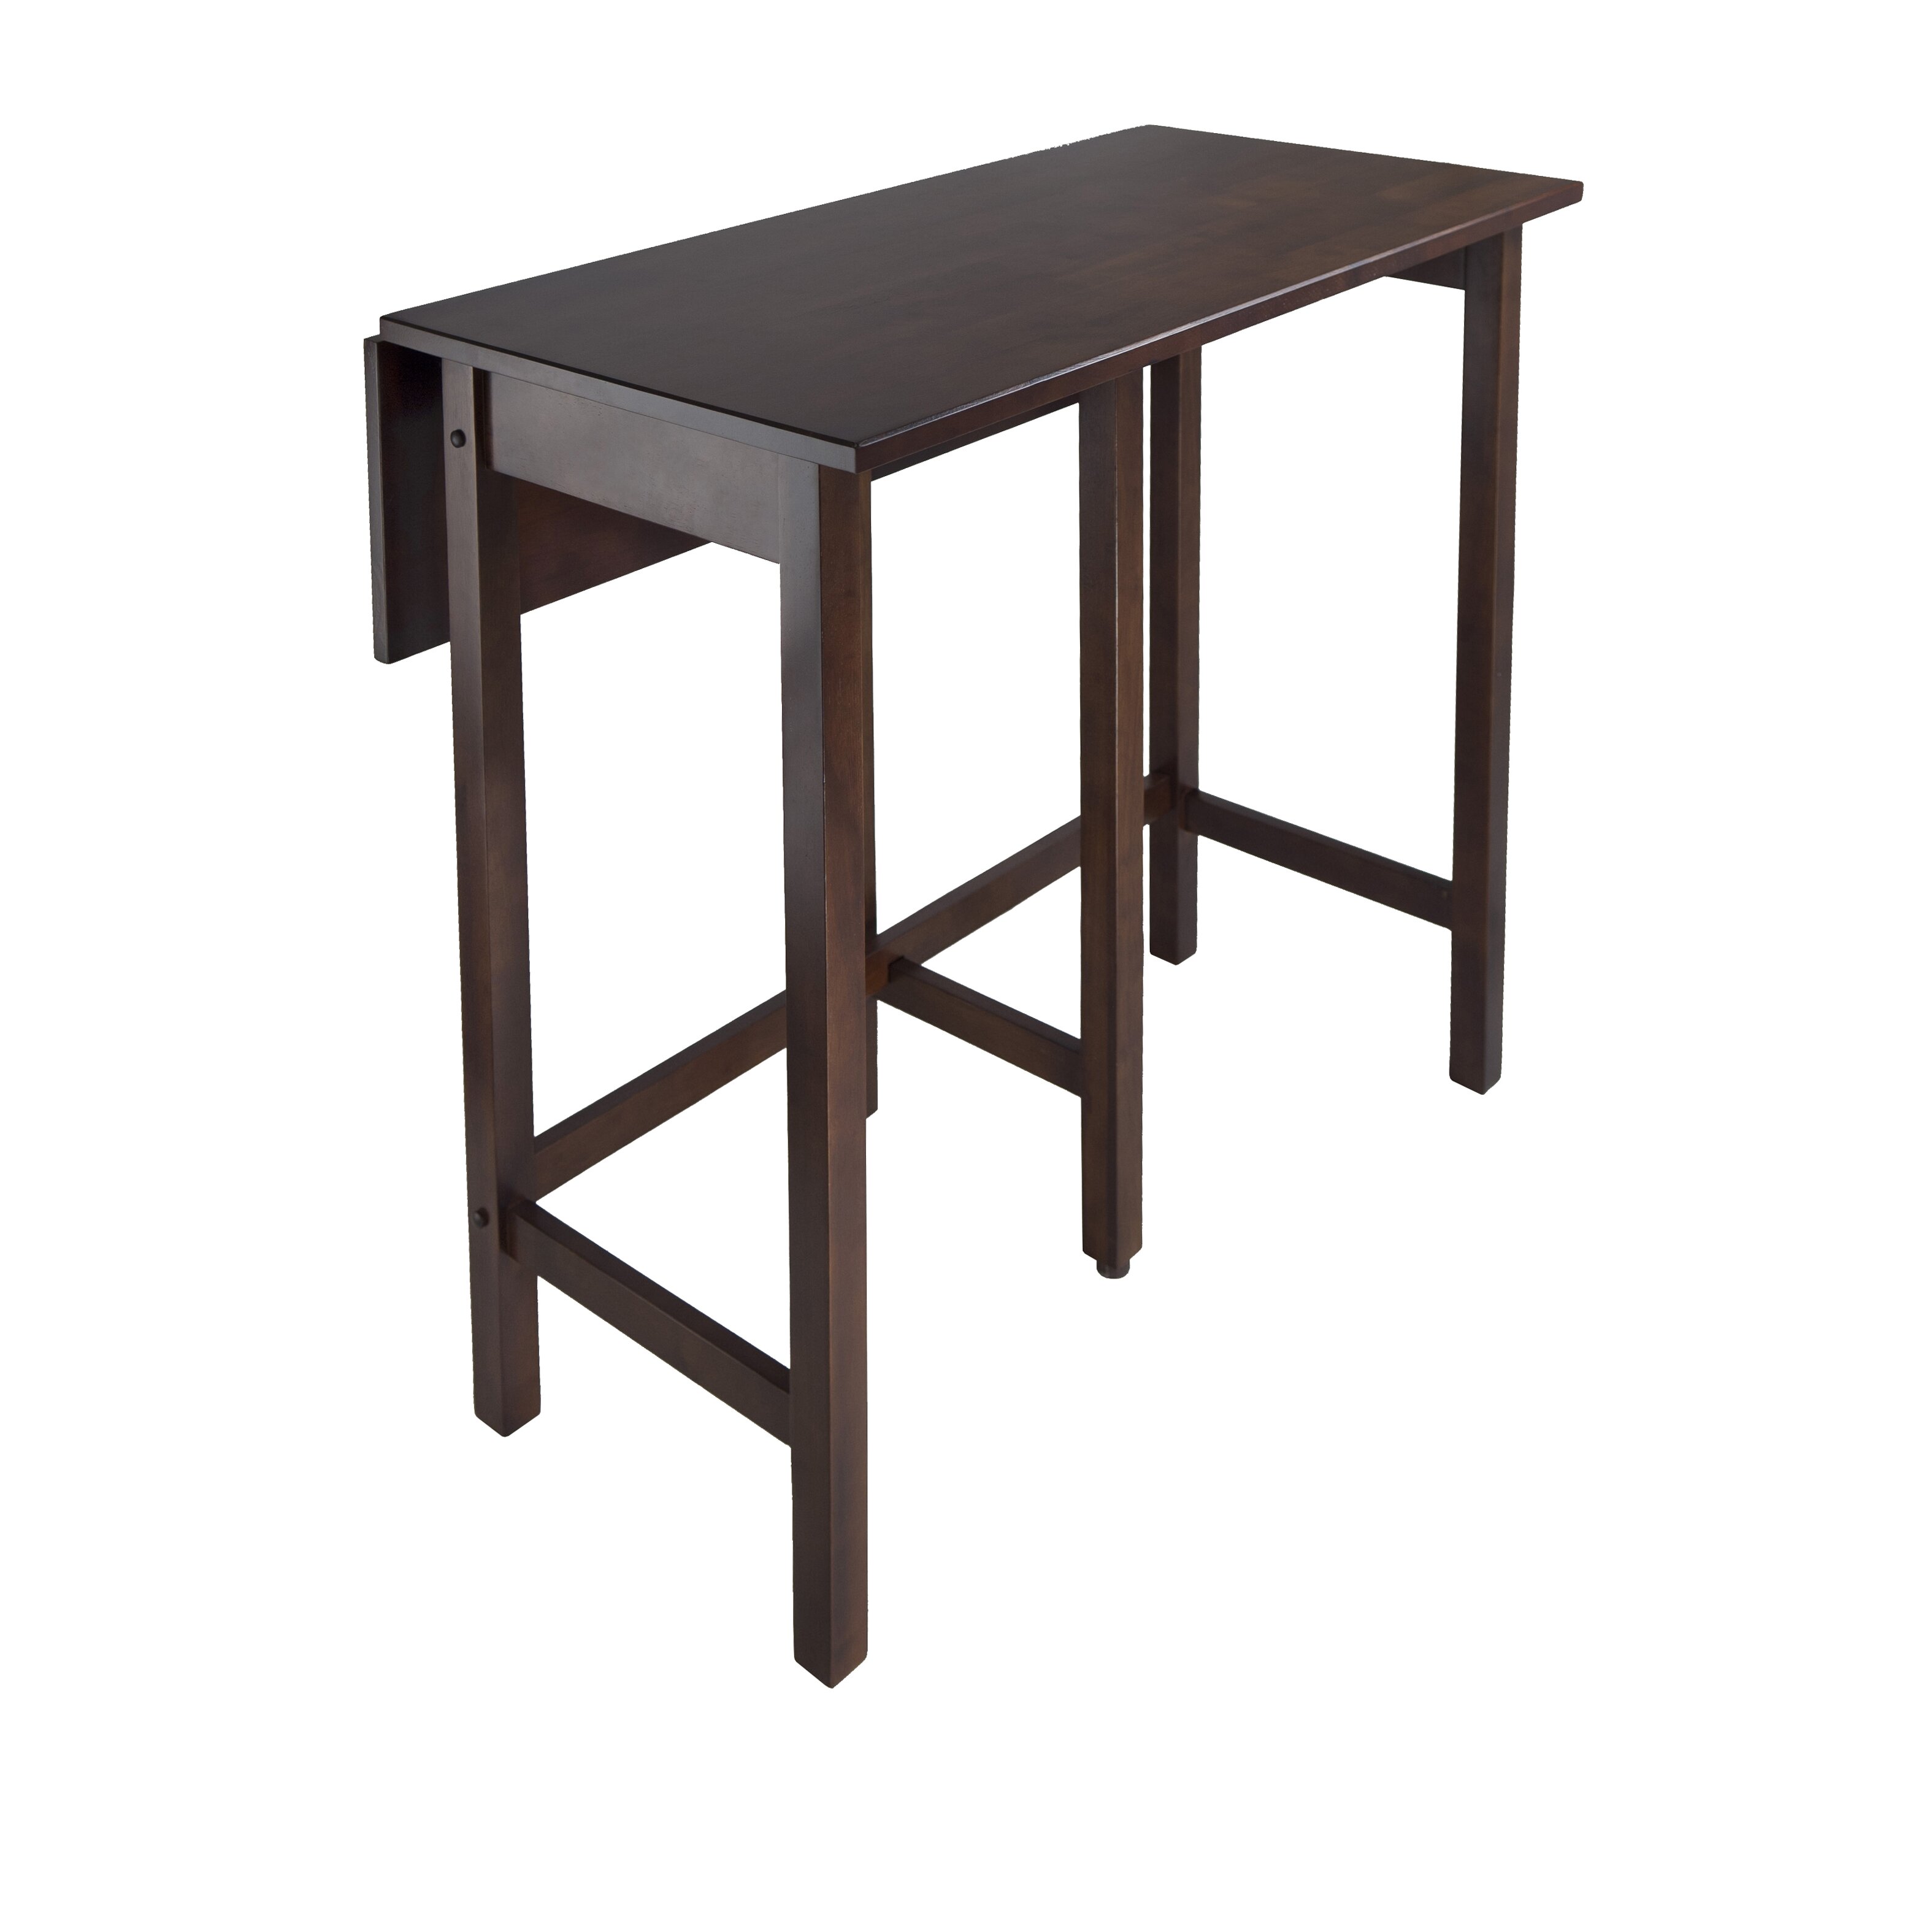 Winsome Lynnwood Counter Height Extendable Dining Table & Reviews | Wayfair